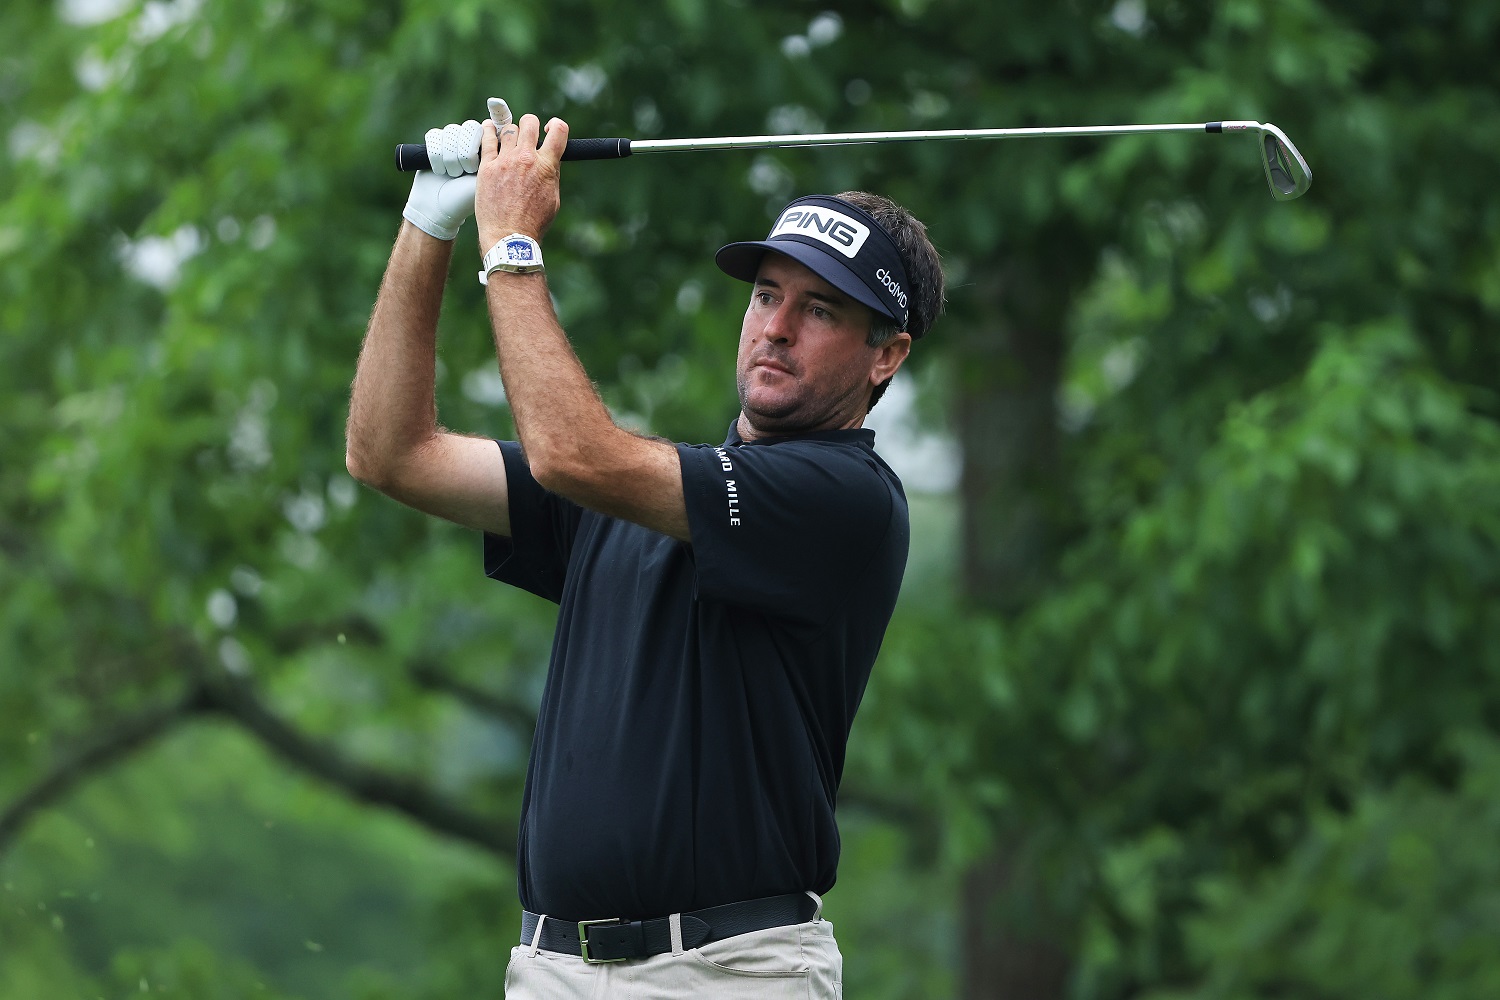 Bubba Watson plays the 14th hole during the first round of the Memorial Tournament at Muirfield Village Golf Club on June 3, 2021.